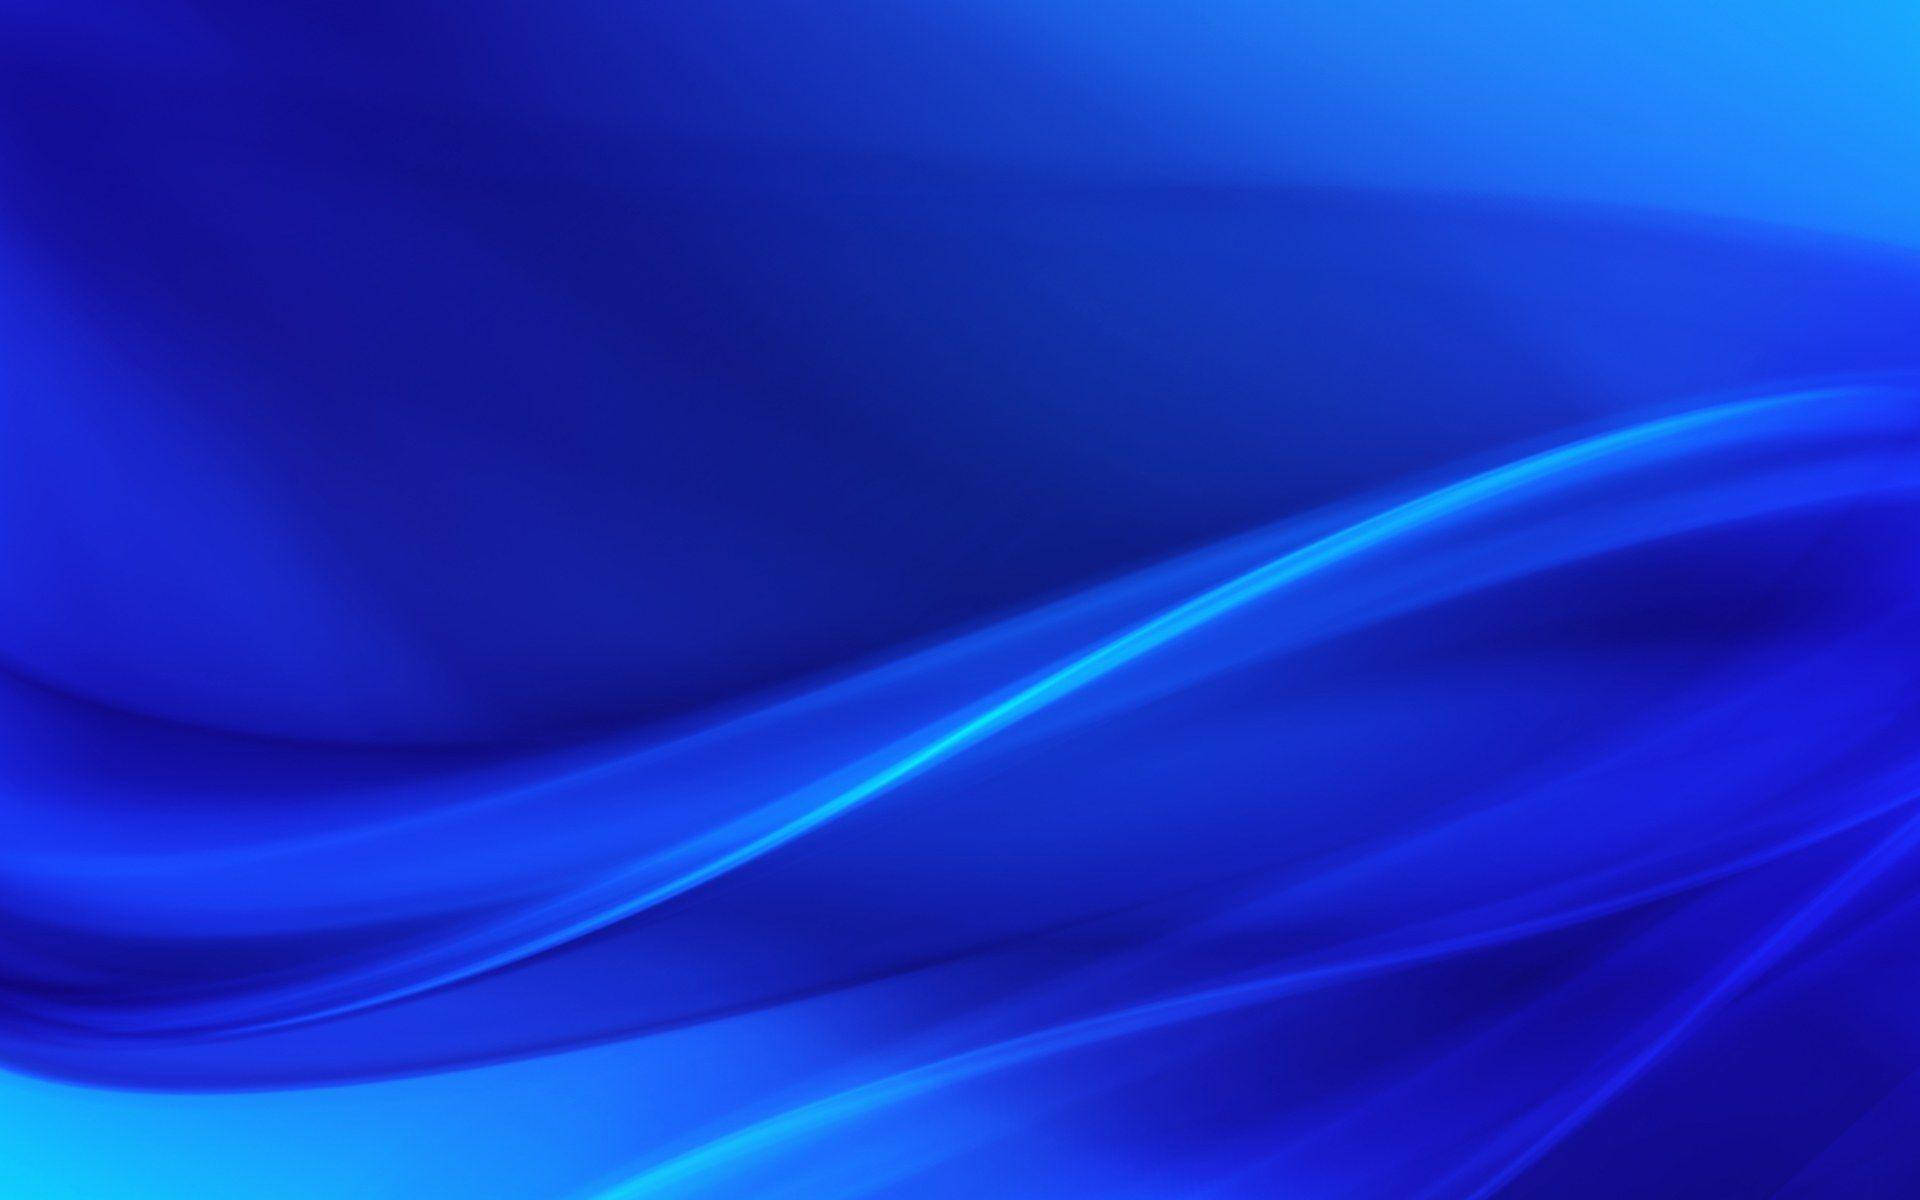 Blue Aero Wavy Lines Abstract Background